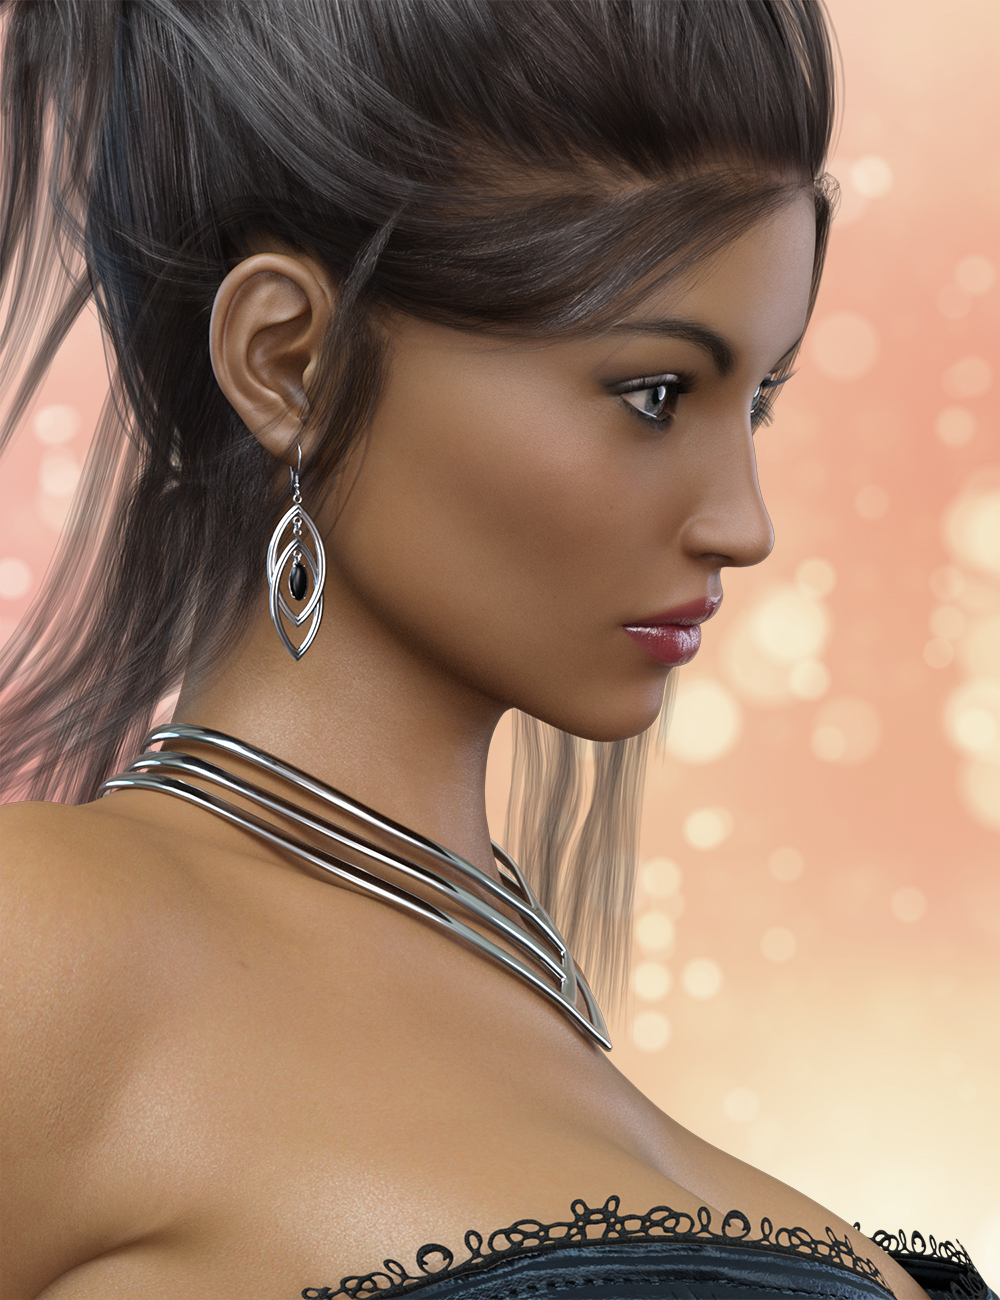 FWSA Cadence HD for Victoria 7 by: Fred Winkler ArtSabby, 3D Models by Daz 3D